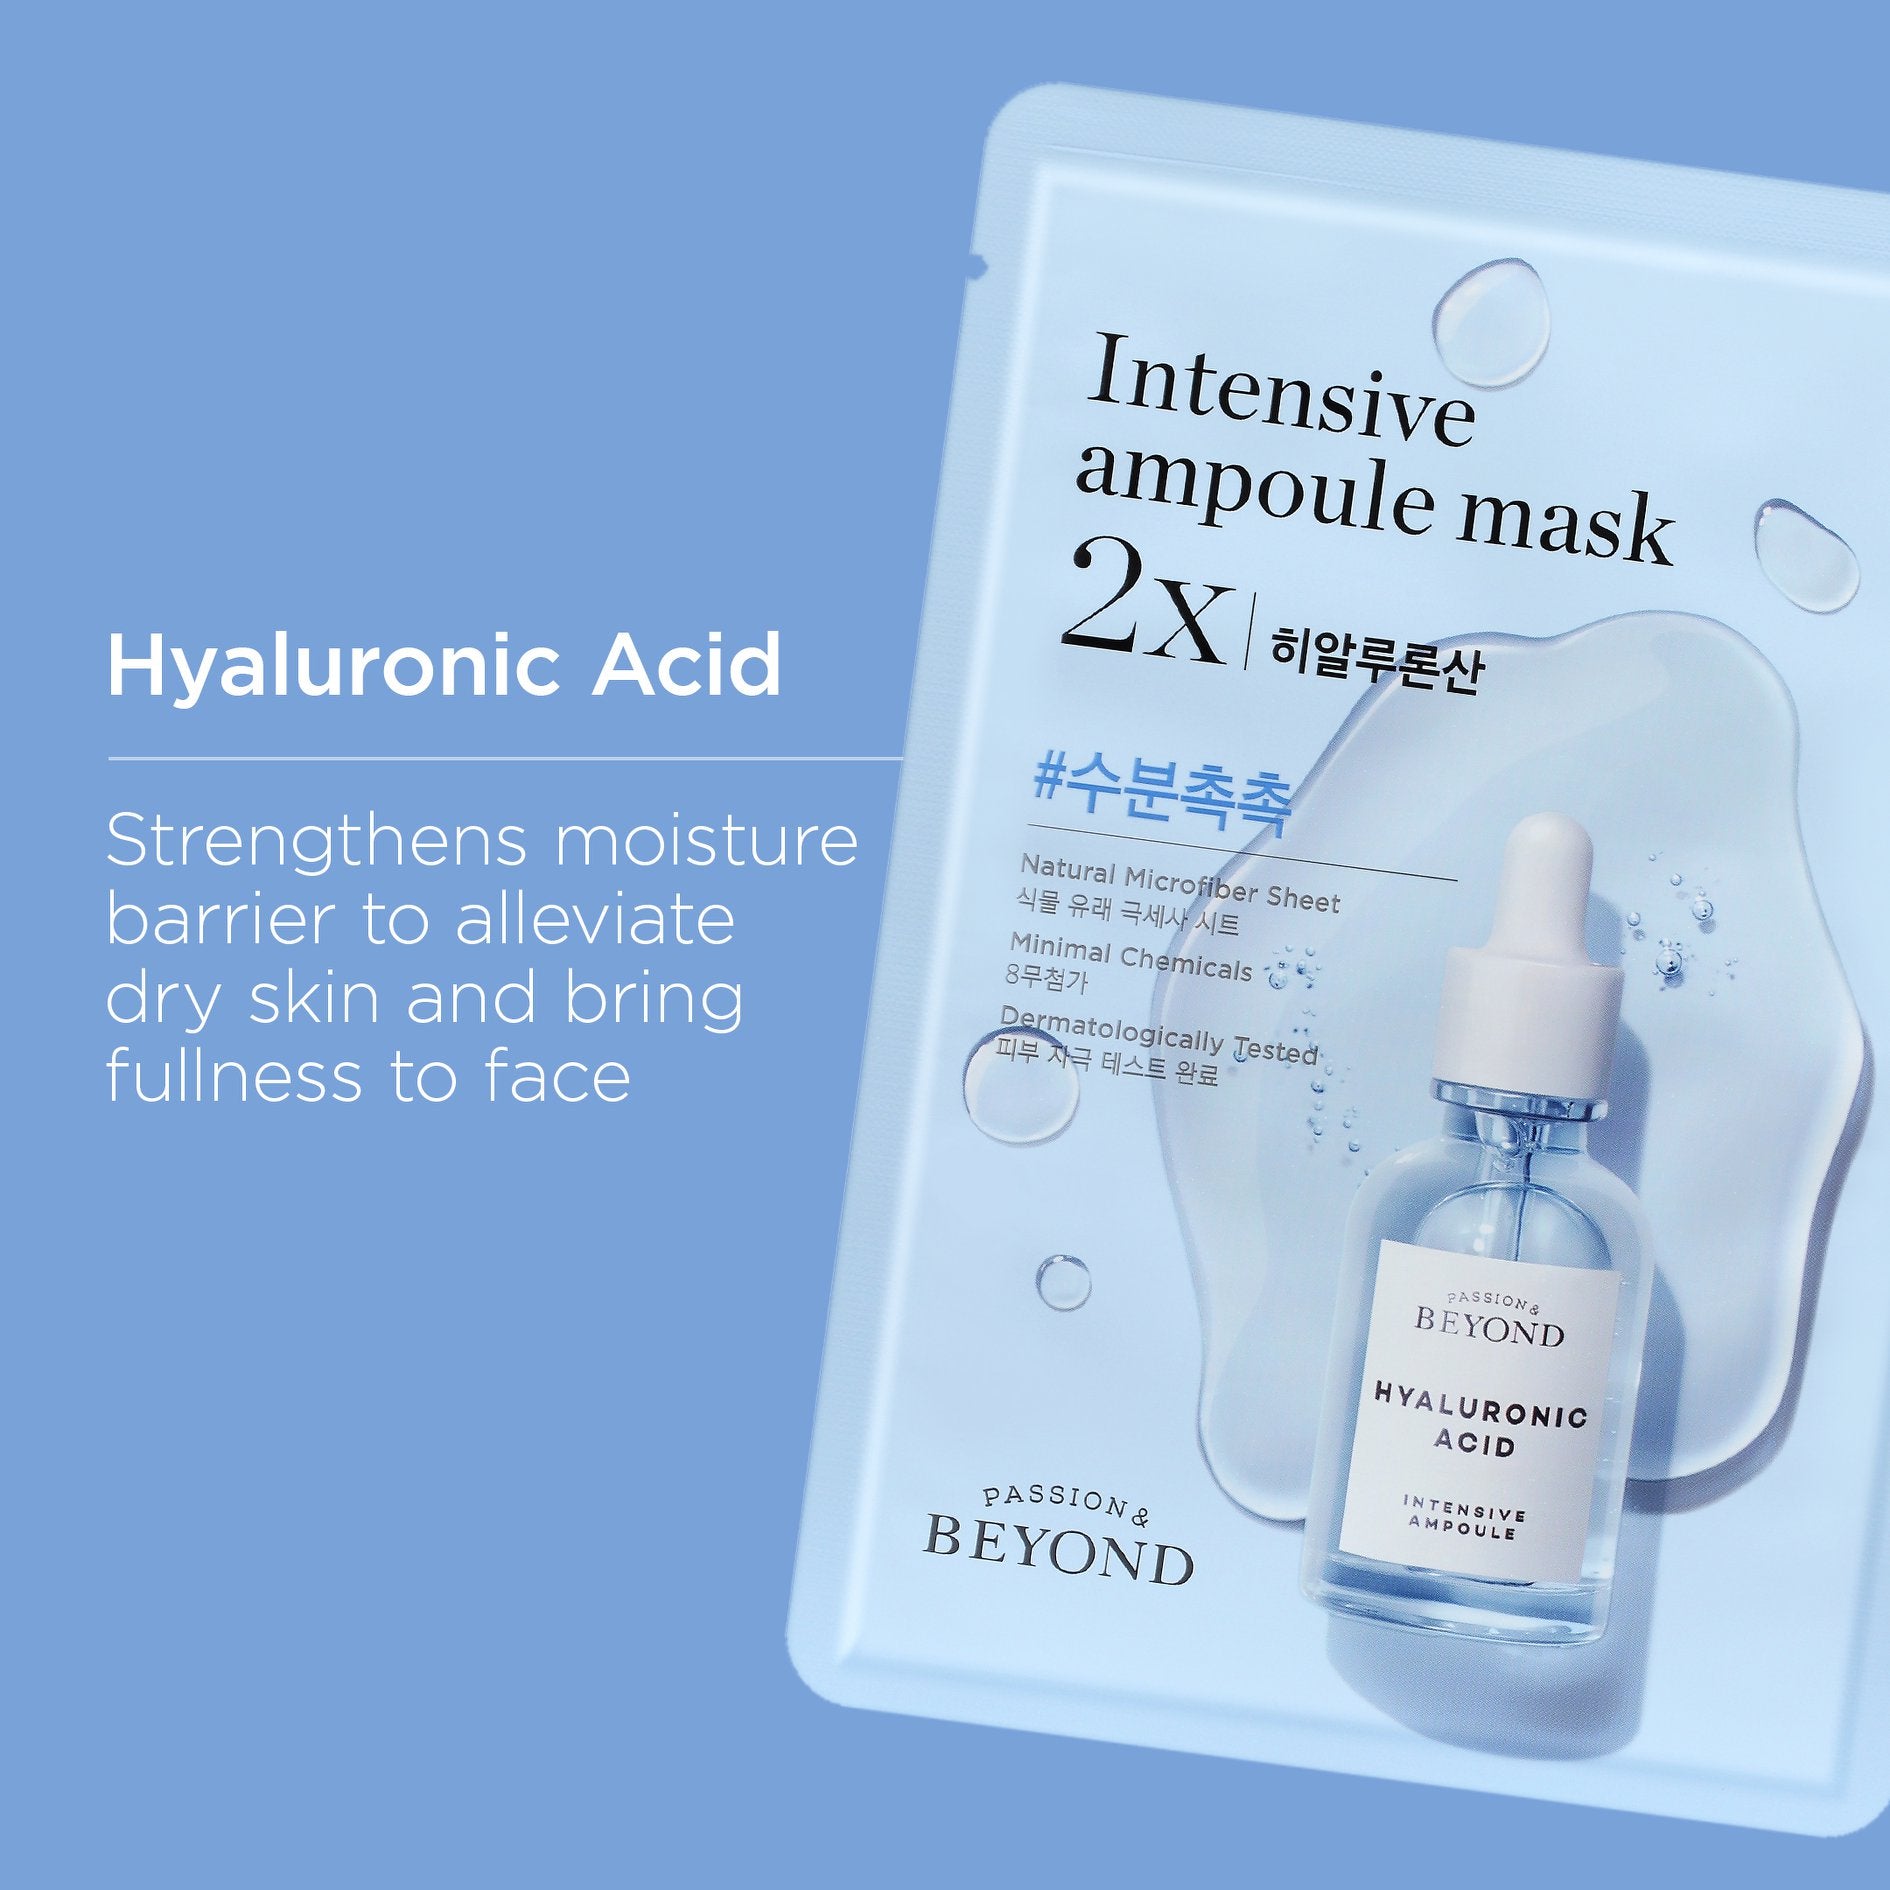 Passion and Beyond Intensive Ampoule Mask 2x ( HYALURONIC ACID ) - 25ml